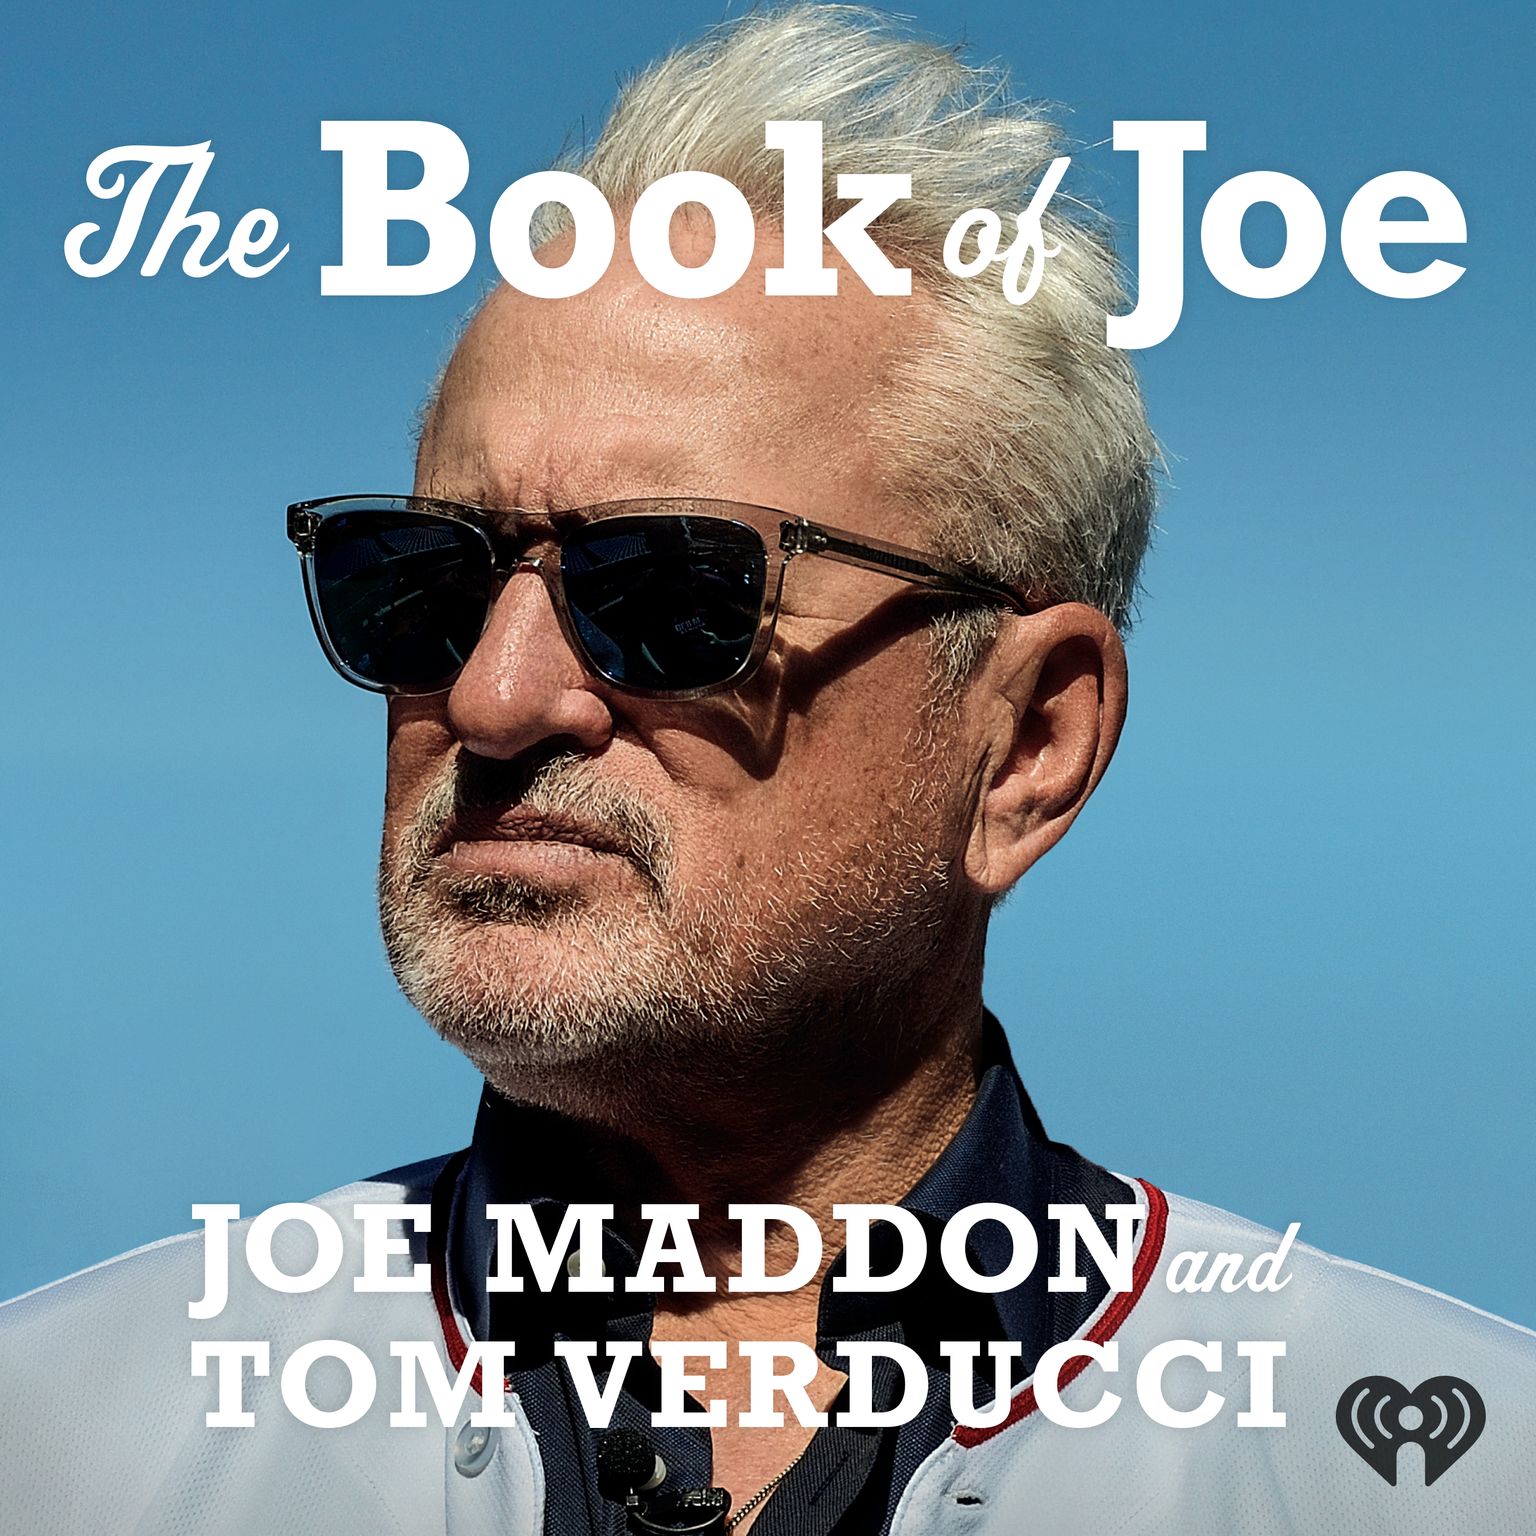 Book of Joe: Bench Coaches, The Art of Catching, Free Agent signings, and Pick a Page